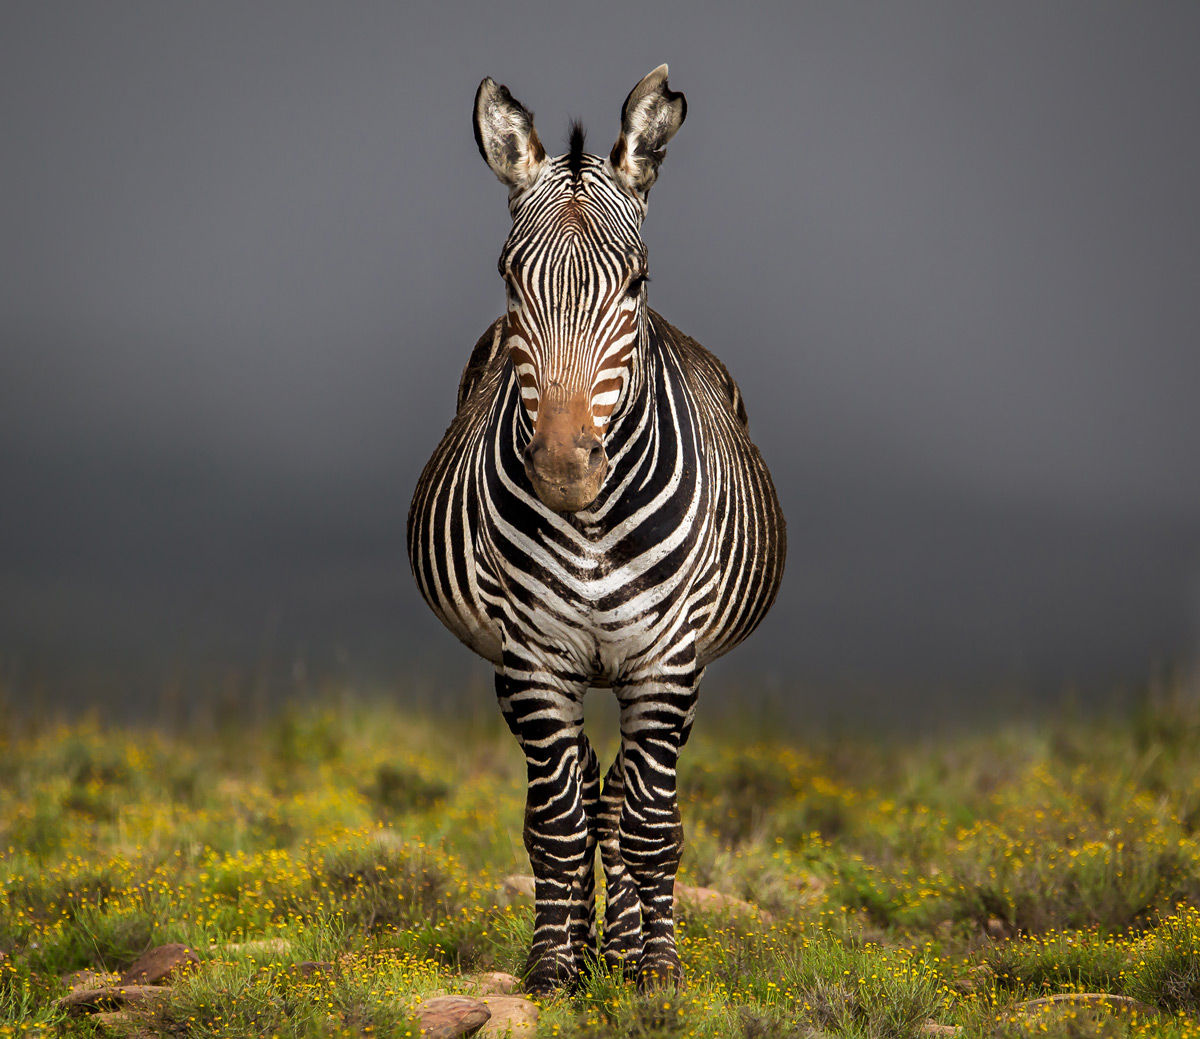 "Just a plain image of a mountain zebra which is part of a sustainable and large population in the Mountain Zebra National Park. The reason I took the image was to capture and celebrate how they (as a species) were brought from the brink of extinction to a thriving population today." – Mountain Zebra National Park, South Africa © John Vosloo